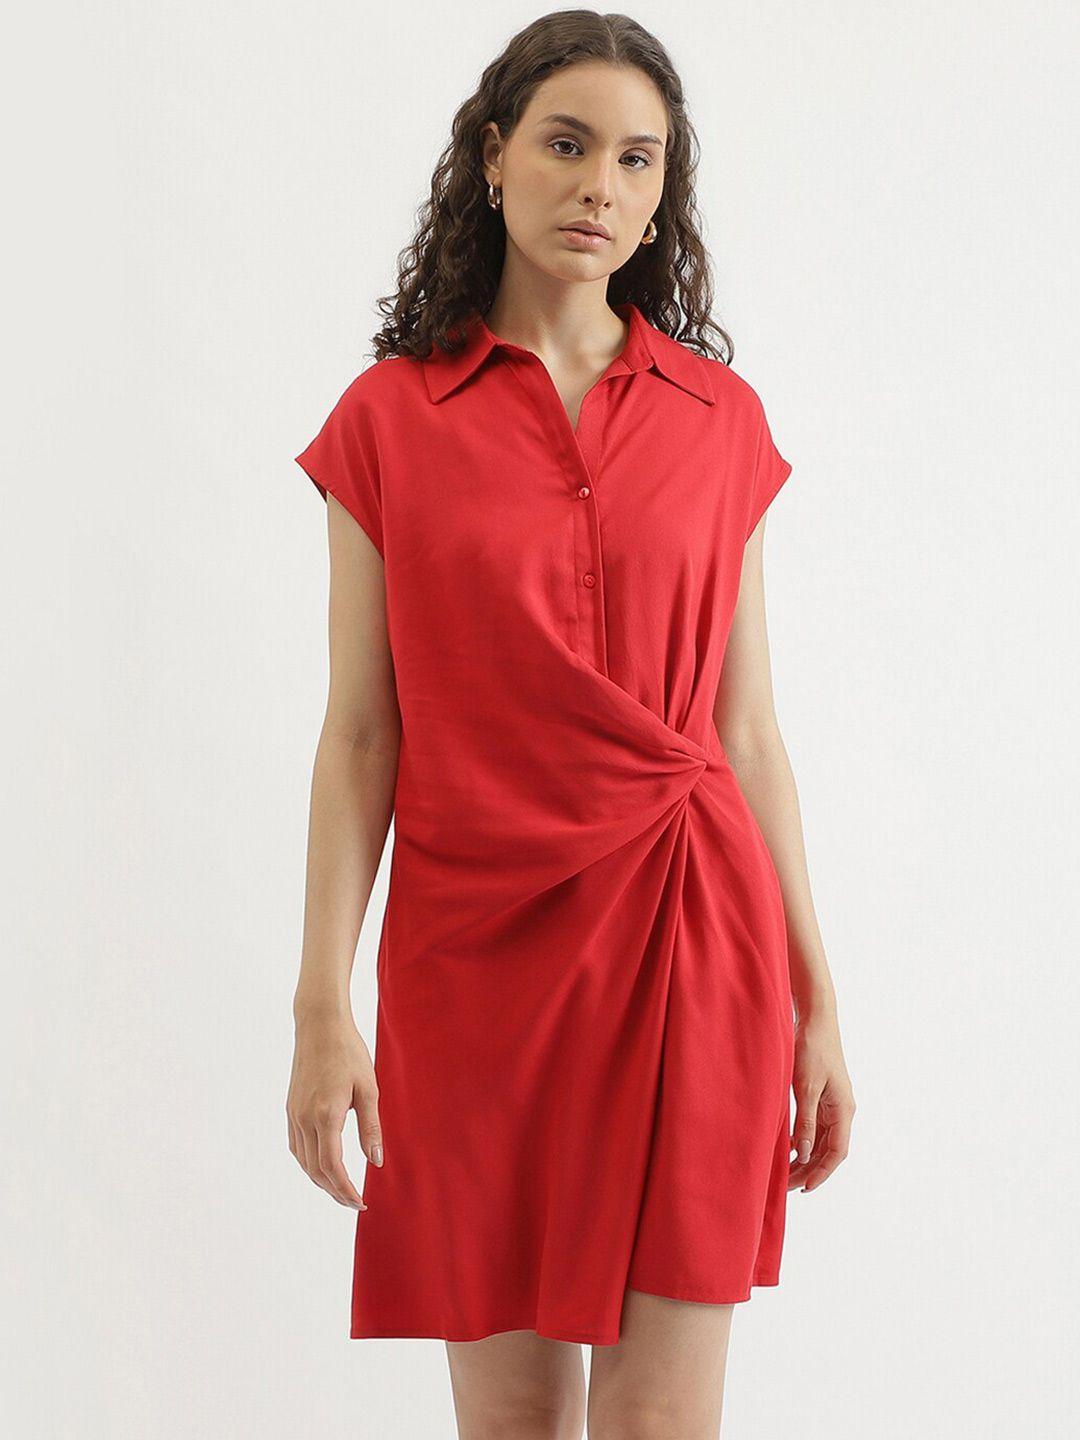 united-colors-of-benetton-red-shirt-dress